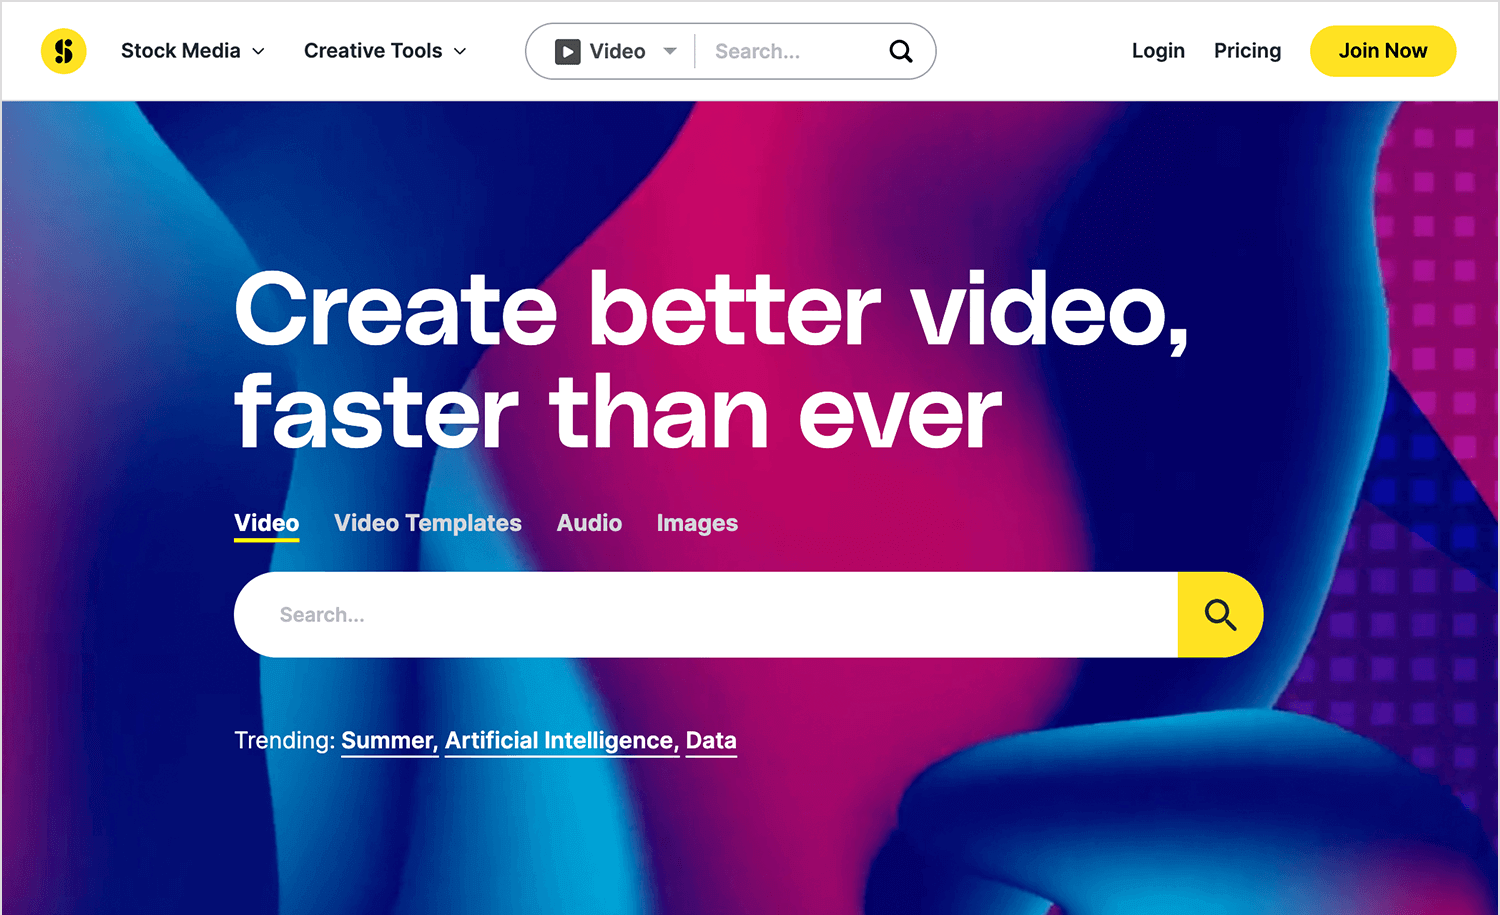 Storyblocks hero image promoting faster video creation with a search bar